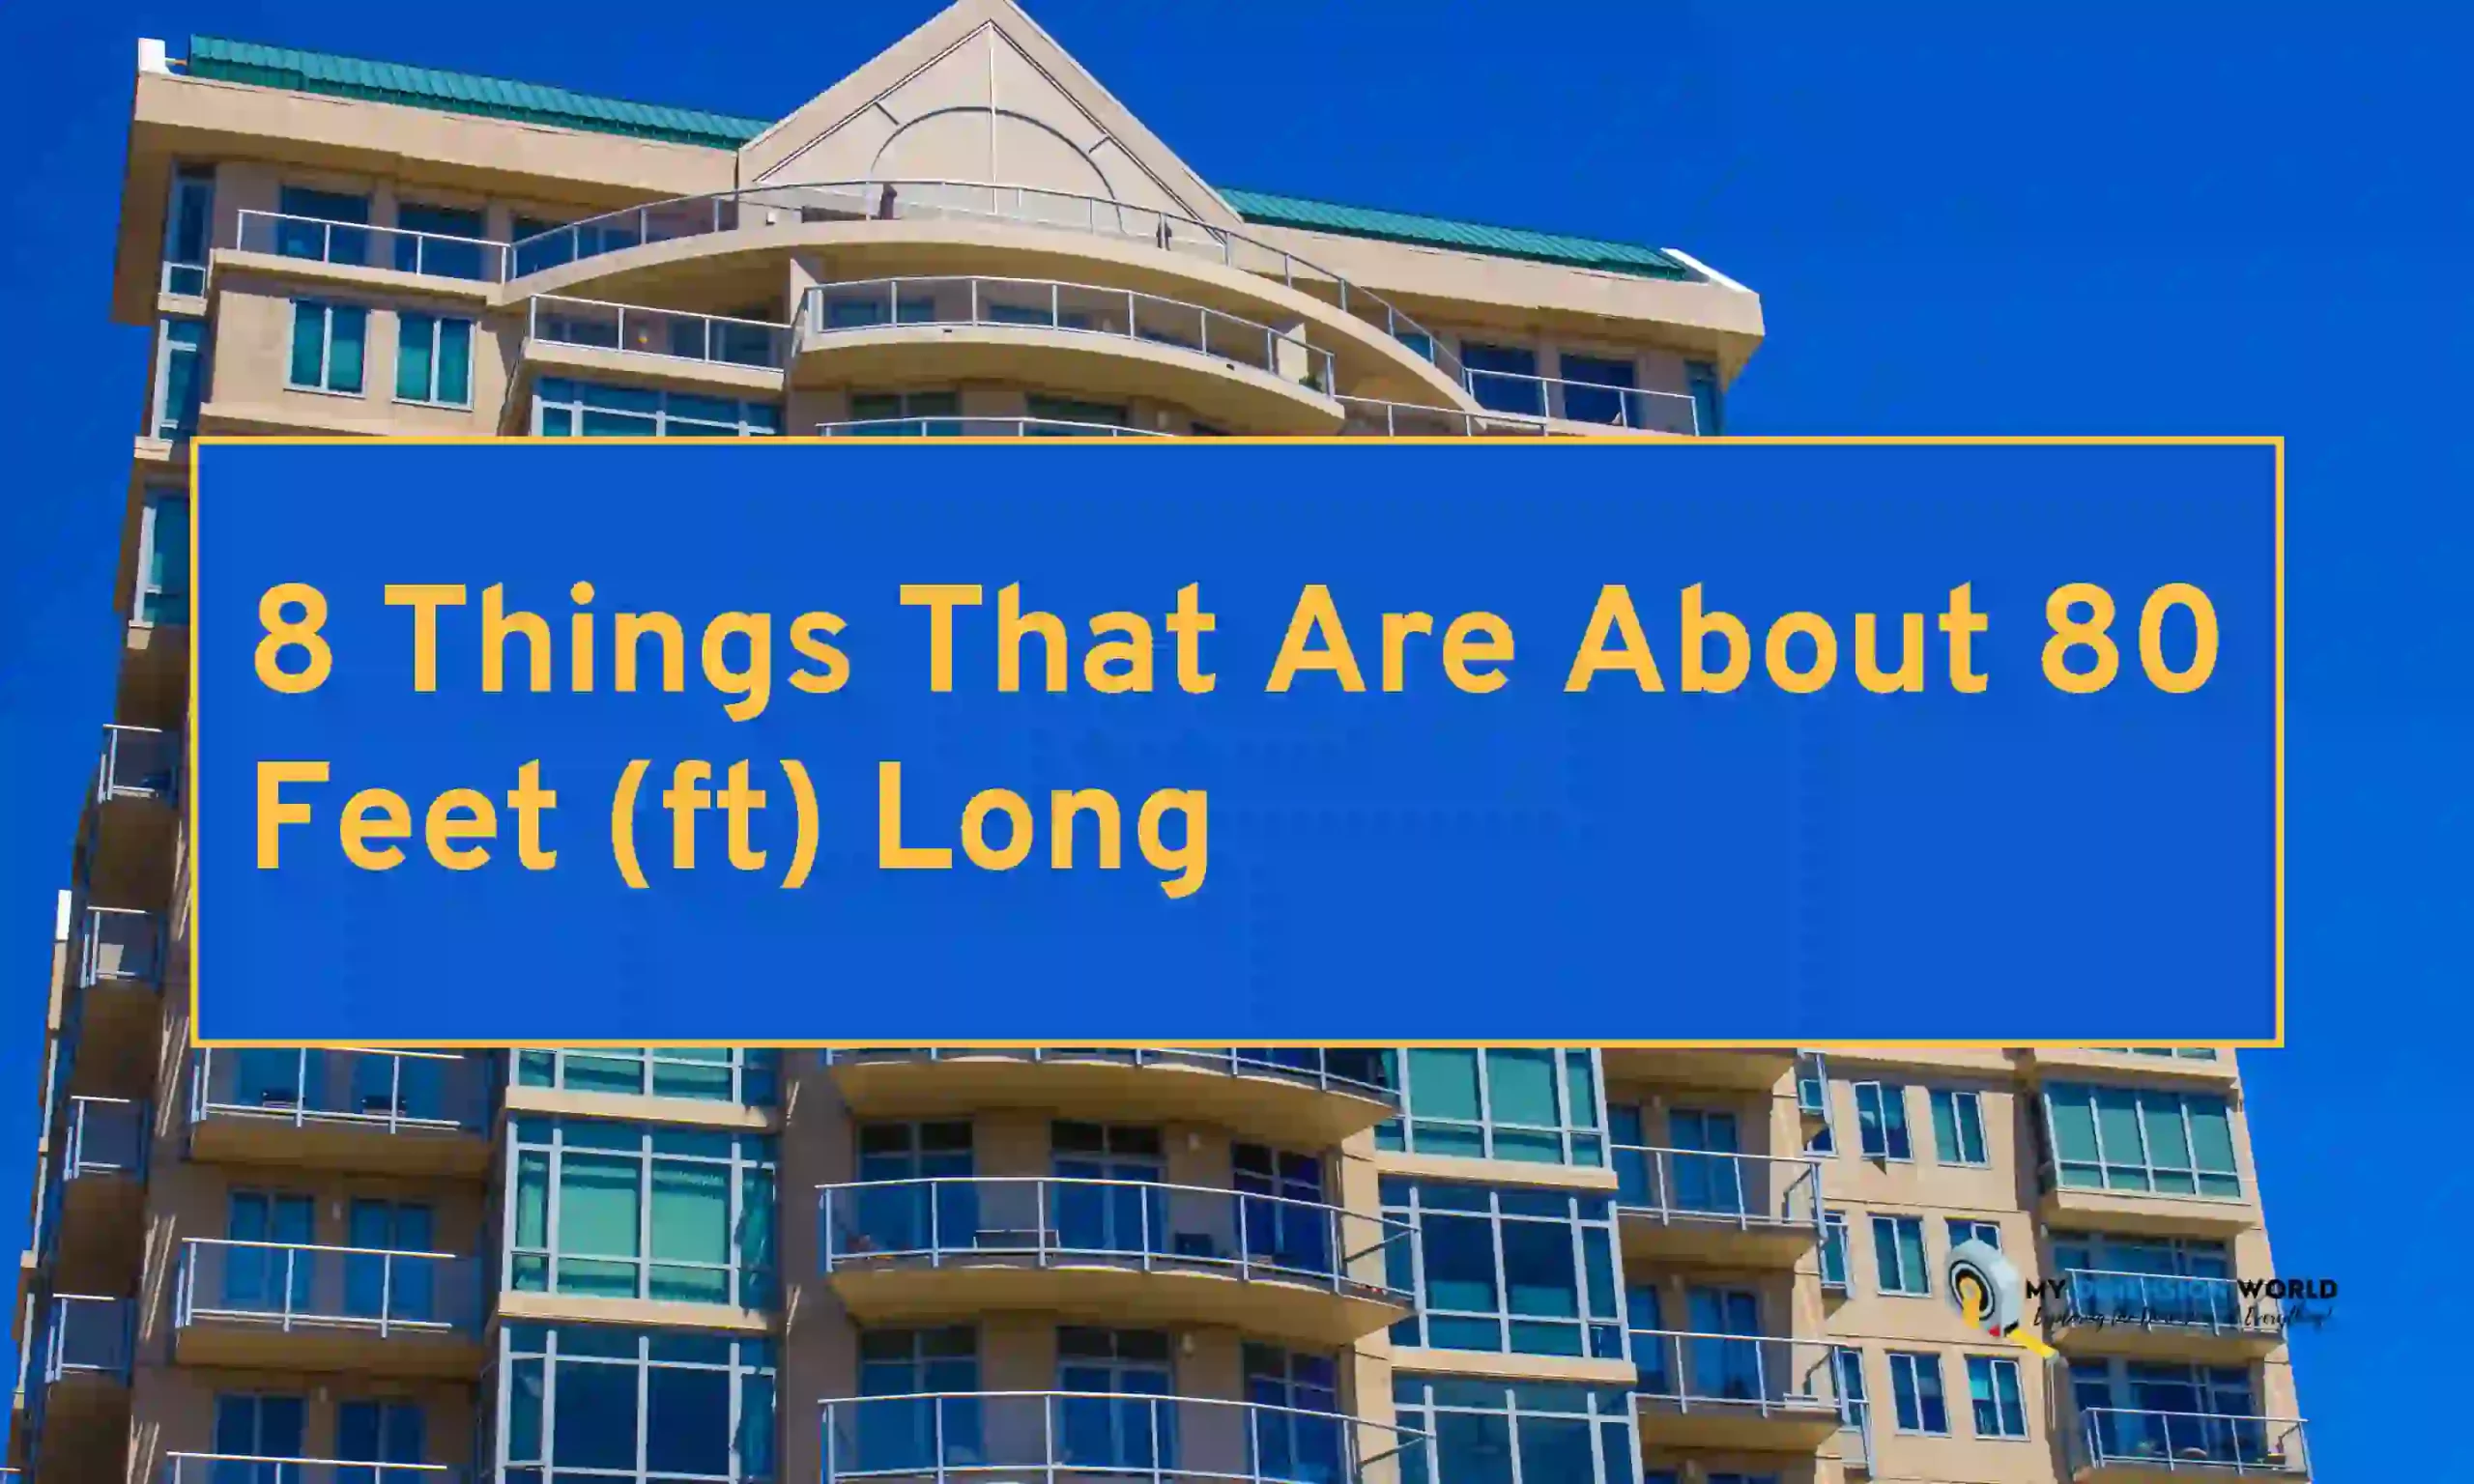 8 Things That Are About 80 Feet (ft) Long